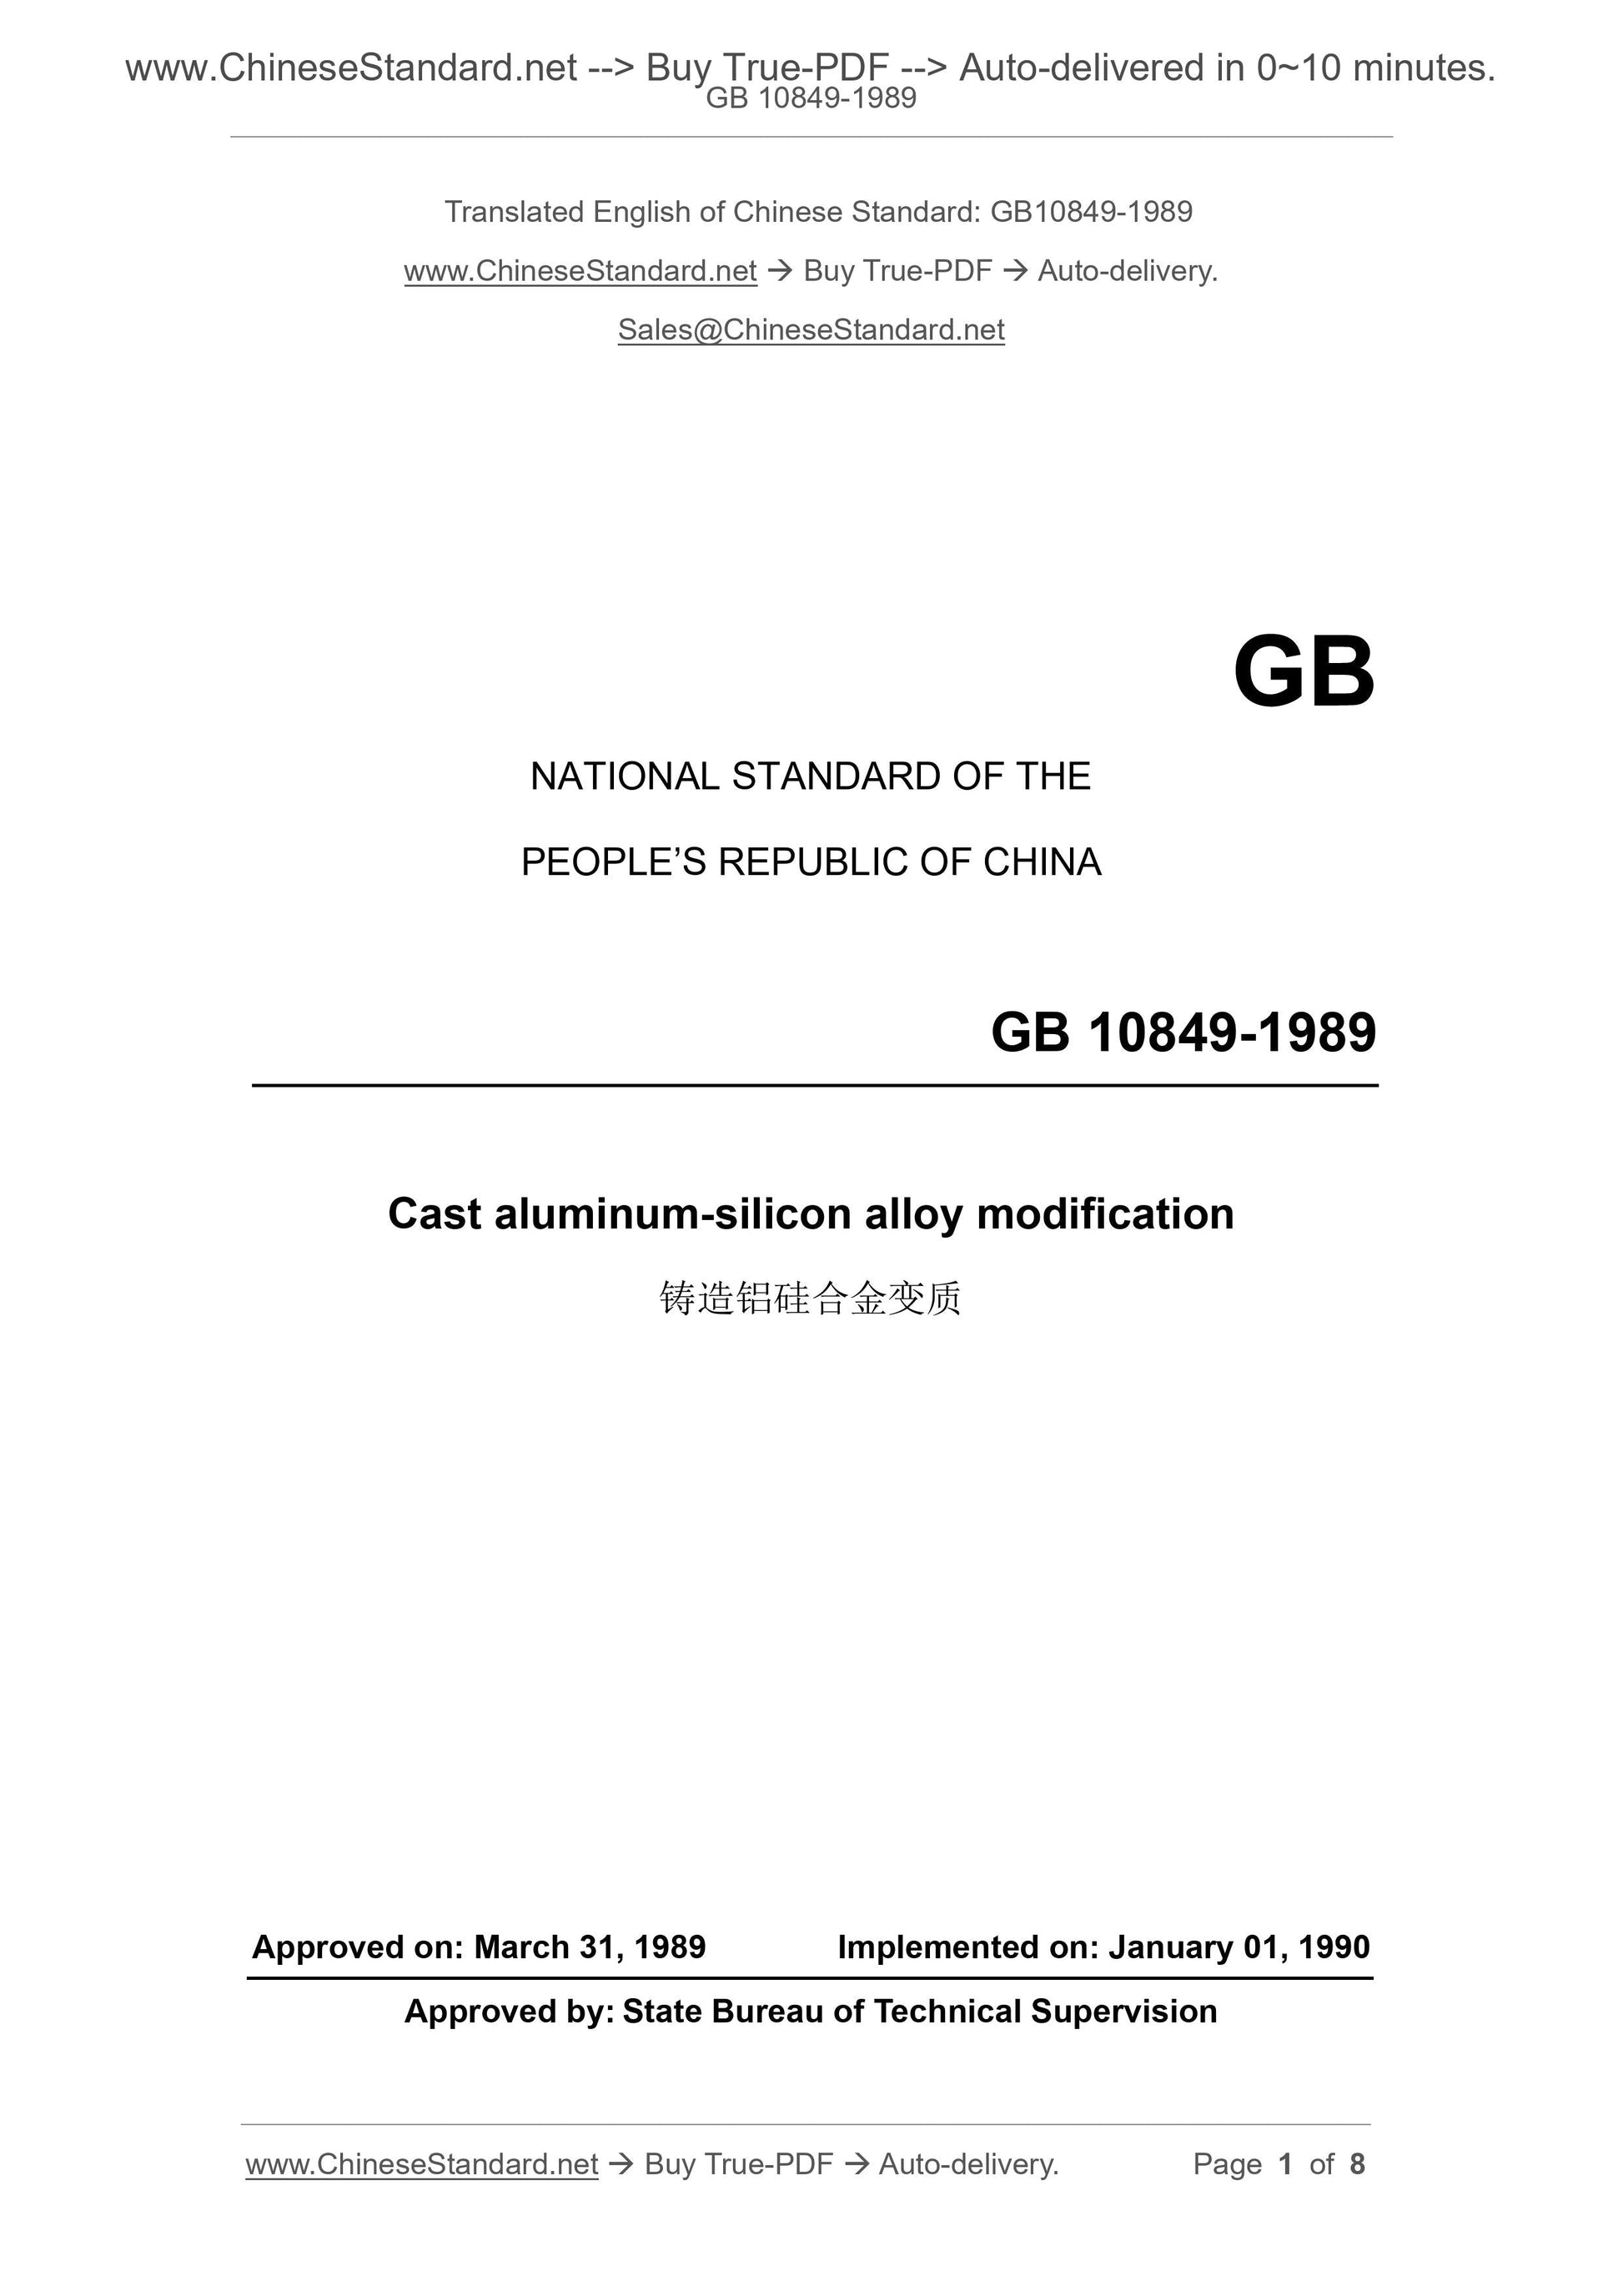 GB 10849-1989 Page 1